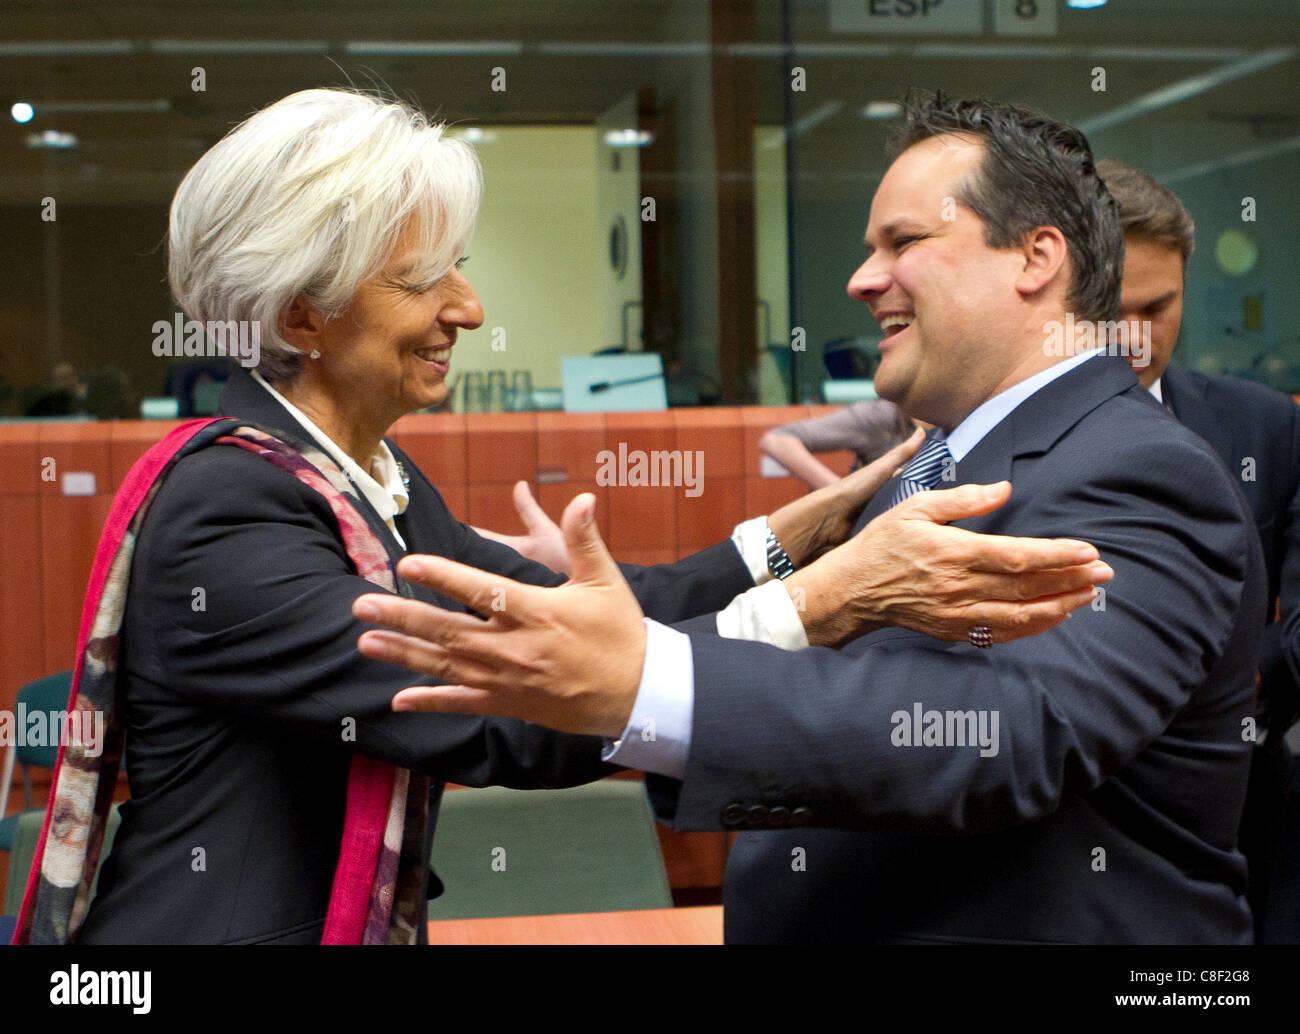 21.10.2011 - Pictured at the Eurogroup meeting of Finance Ministers of the Eurozone,  Christine Lagarde, Director General of the International Monetary Fund with Dutch Finance Minister, Jan Kees de Jager. Stock Photo